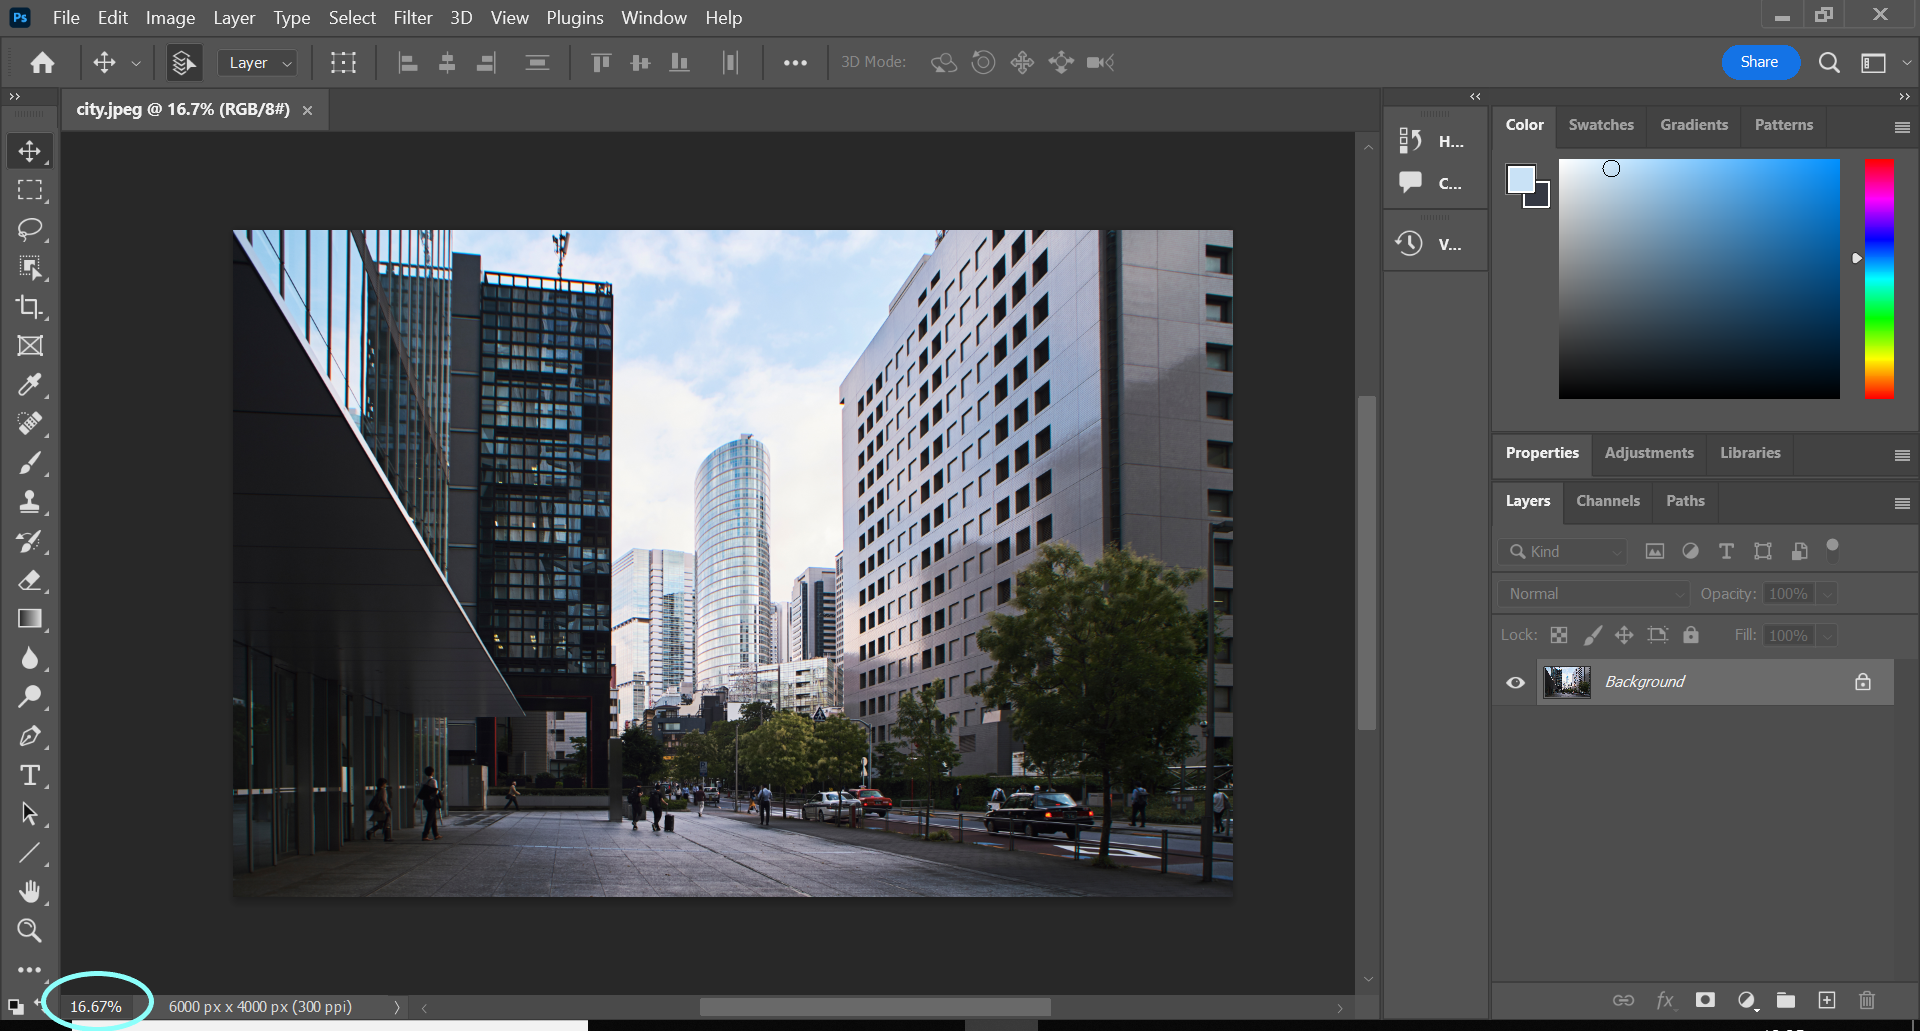 How to sharpen an image in Photoshop